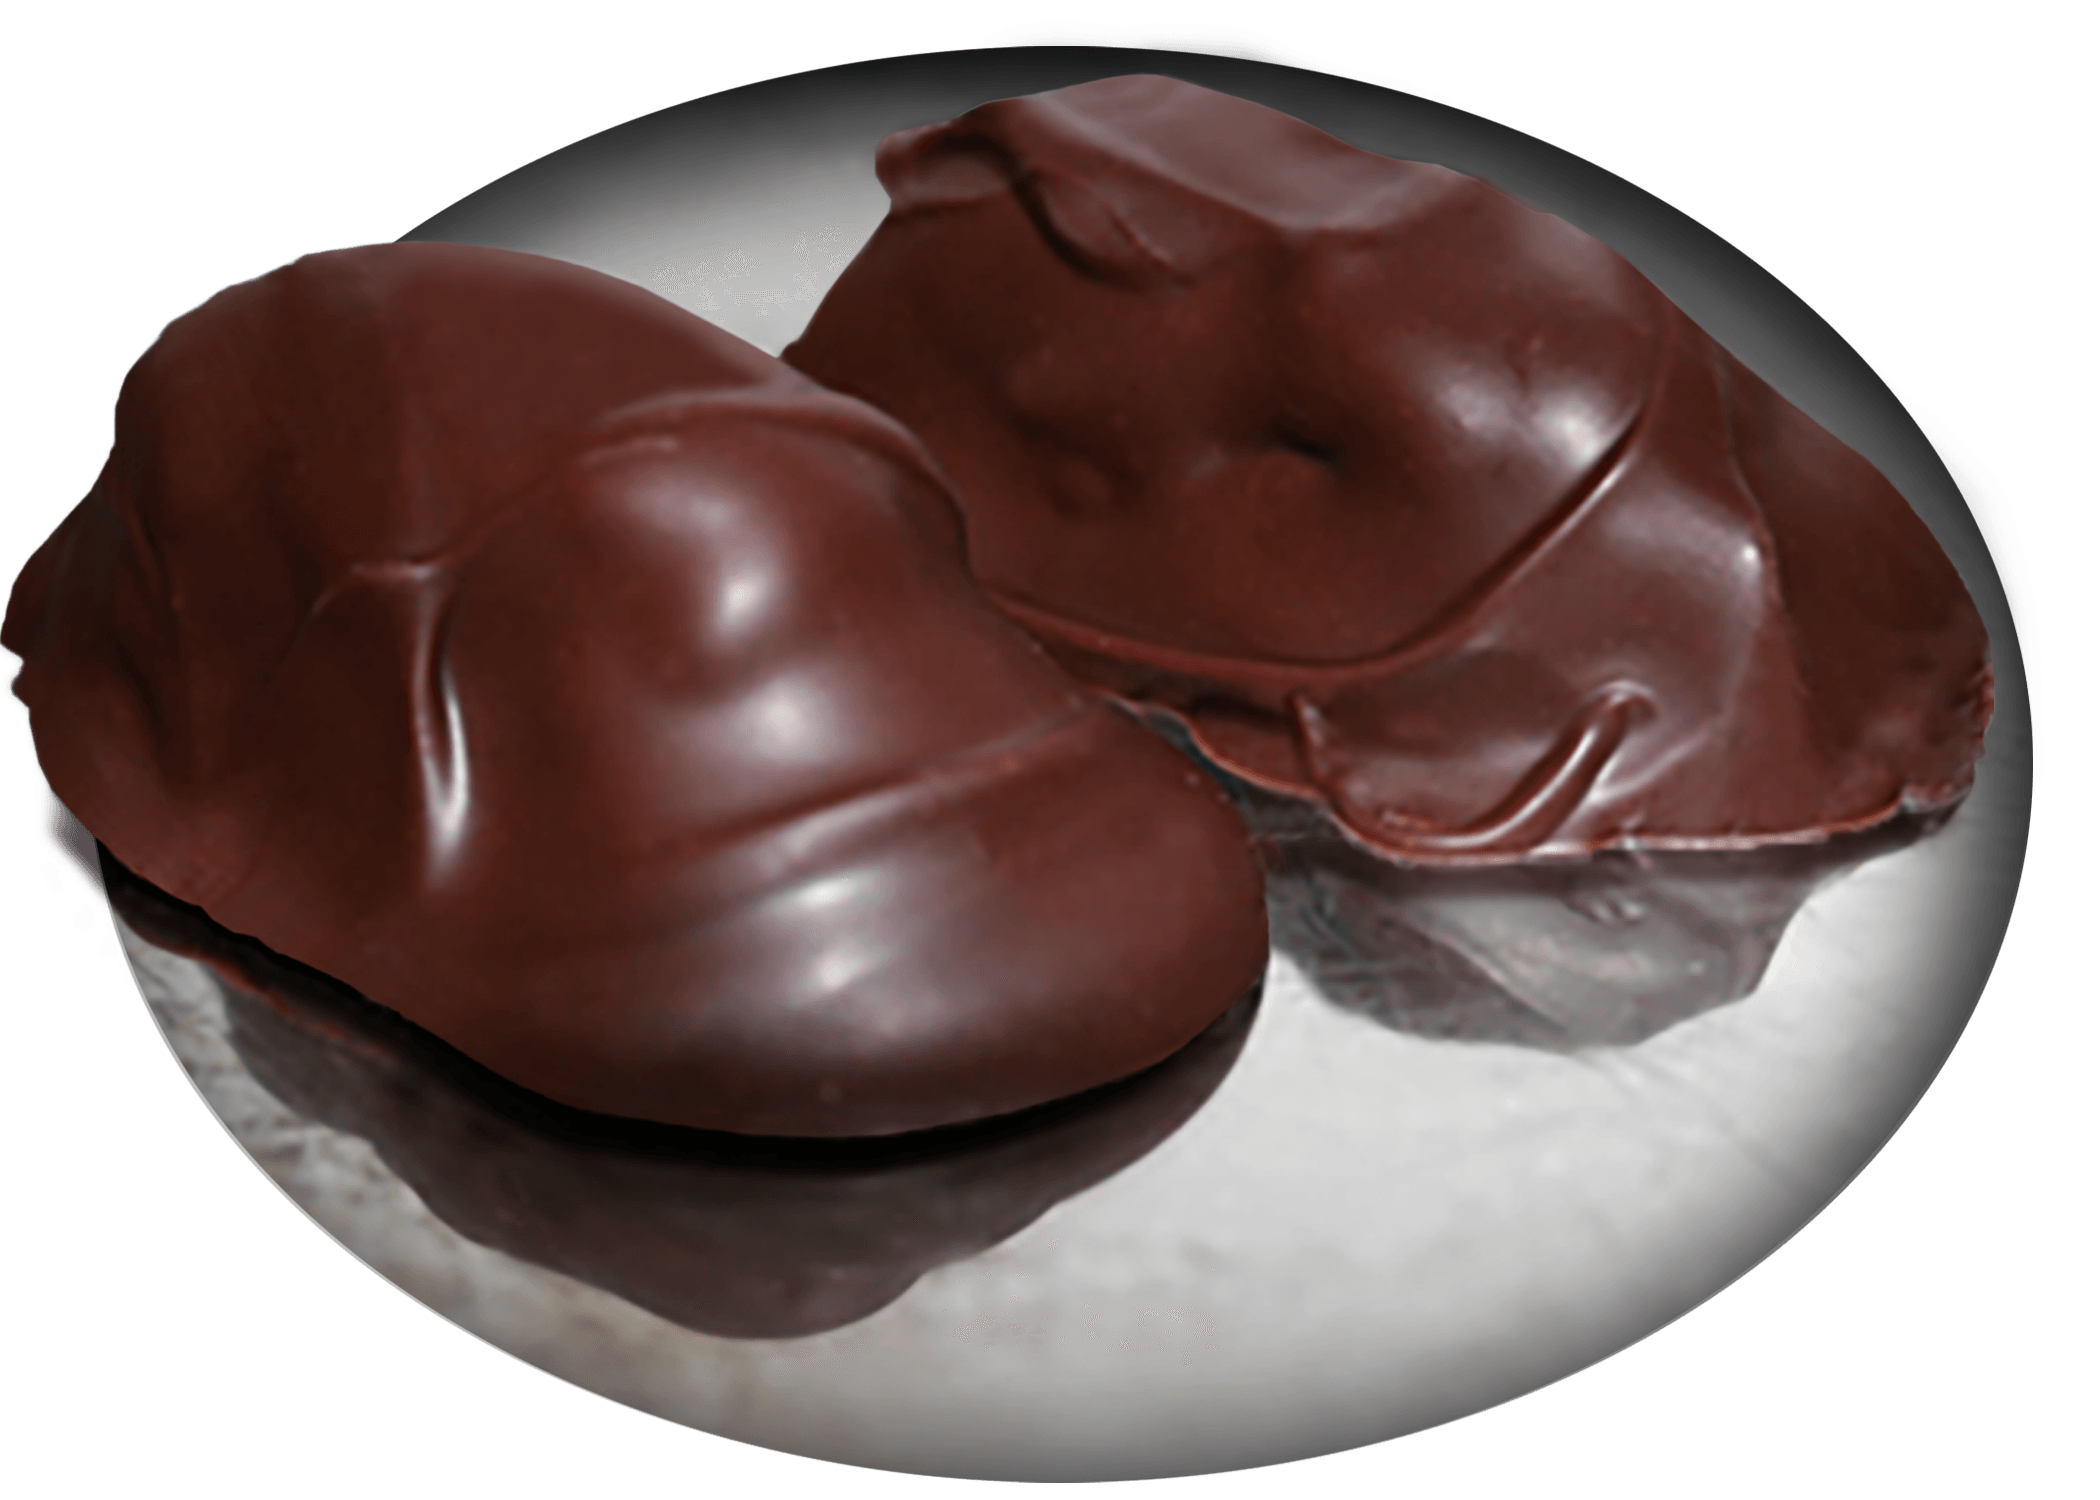 Chocolate Covered Everything — Lexigrahams - Dark chocolate middled with organic peanut butter covered graham cracker. Shipping, delivery, and pick up. Place your order!